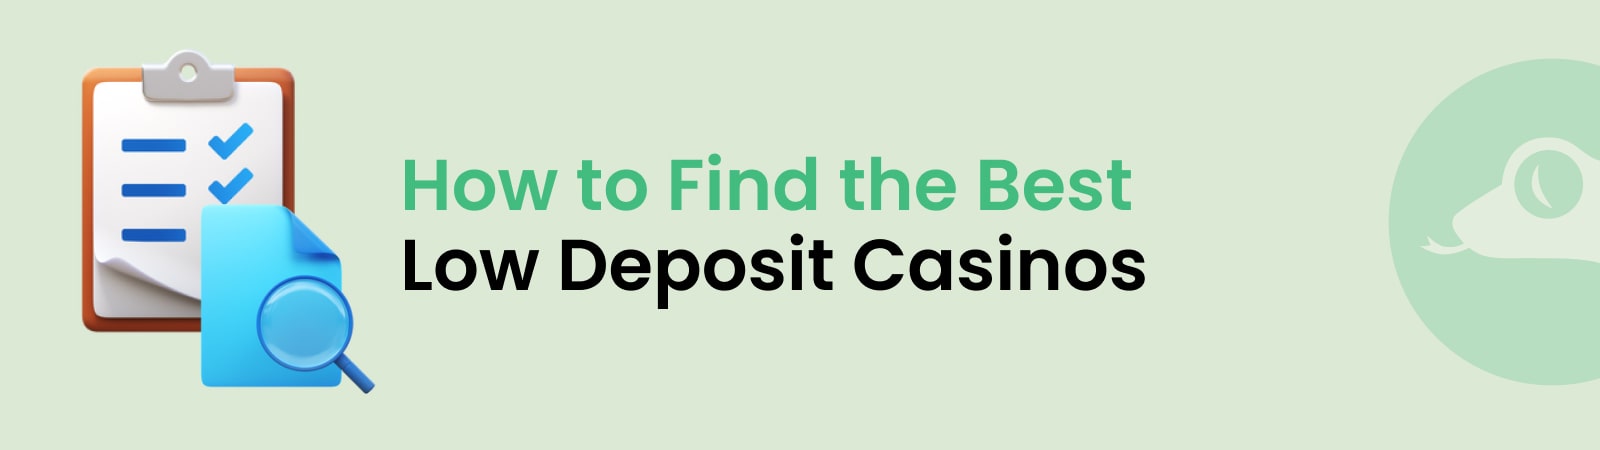 how to find the best low deposit casinos